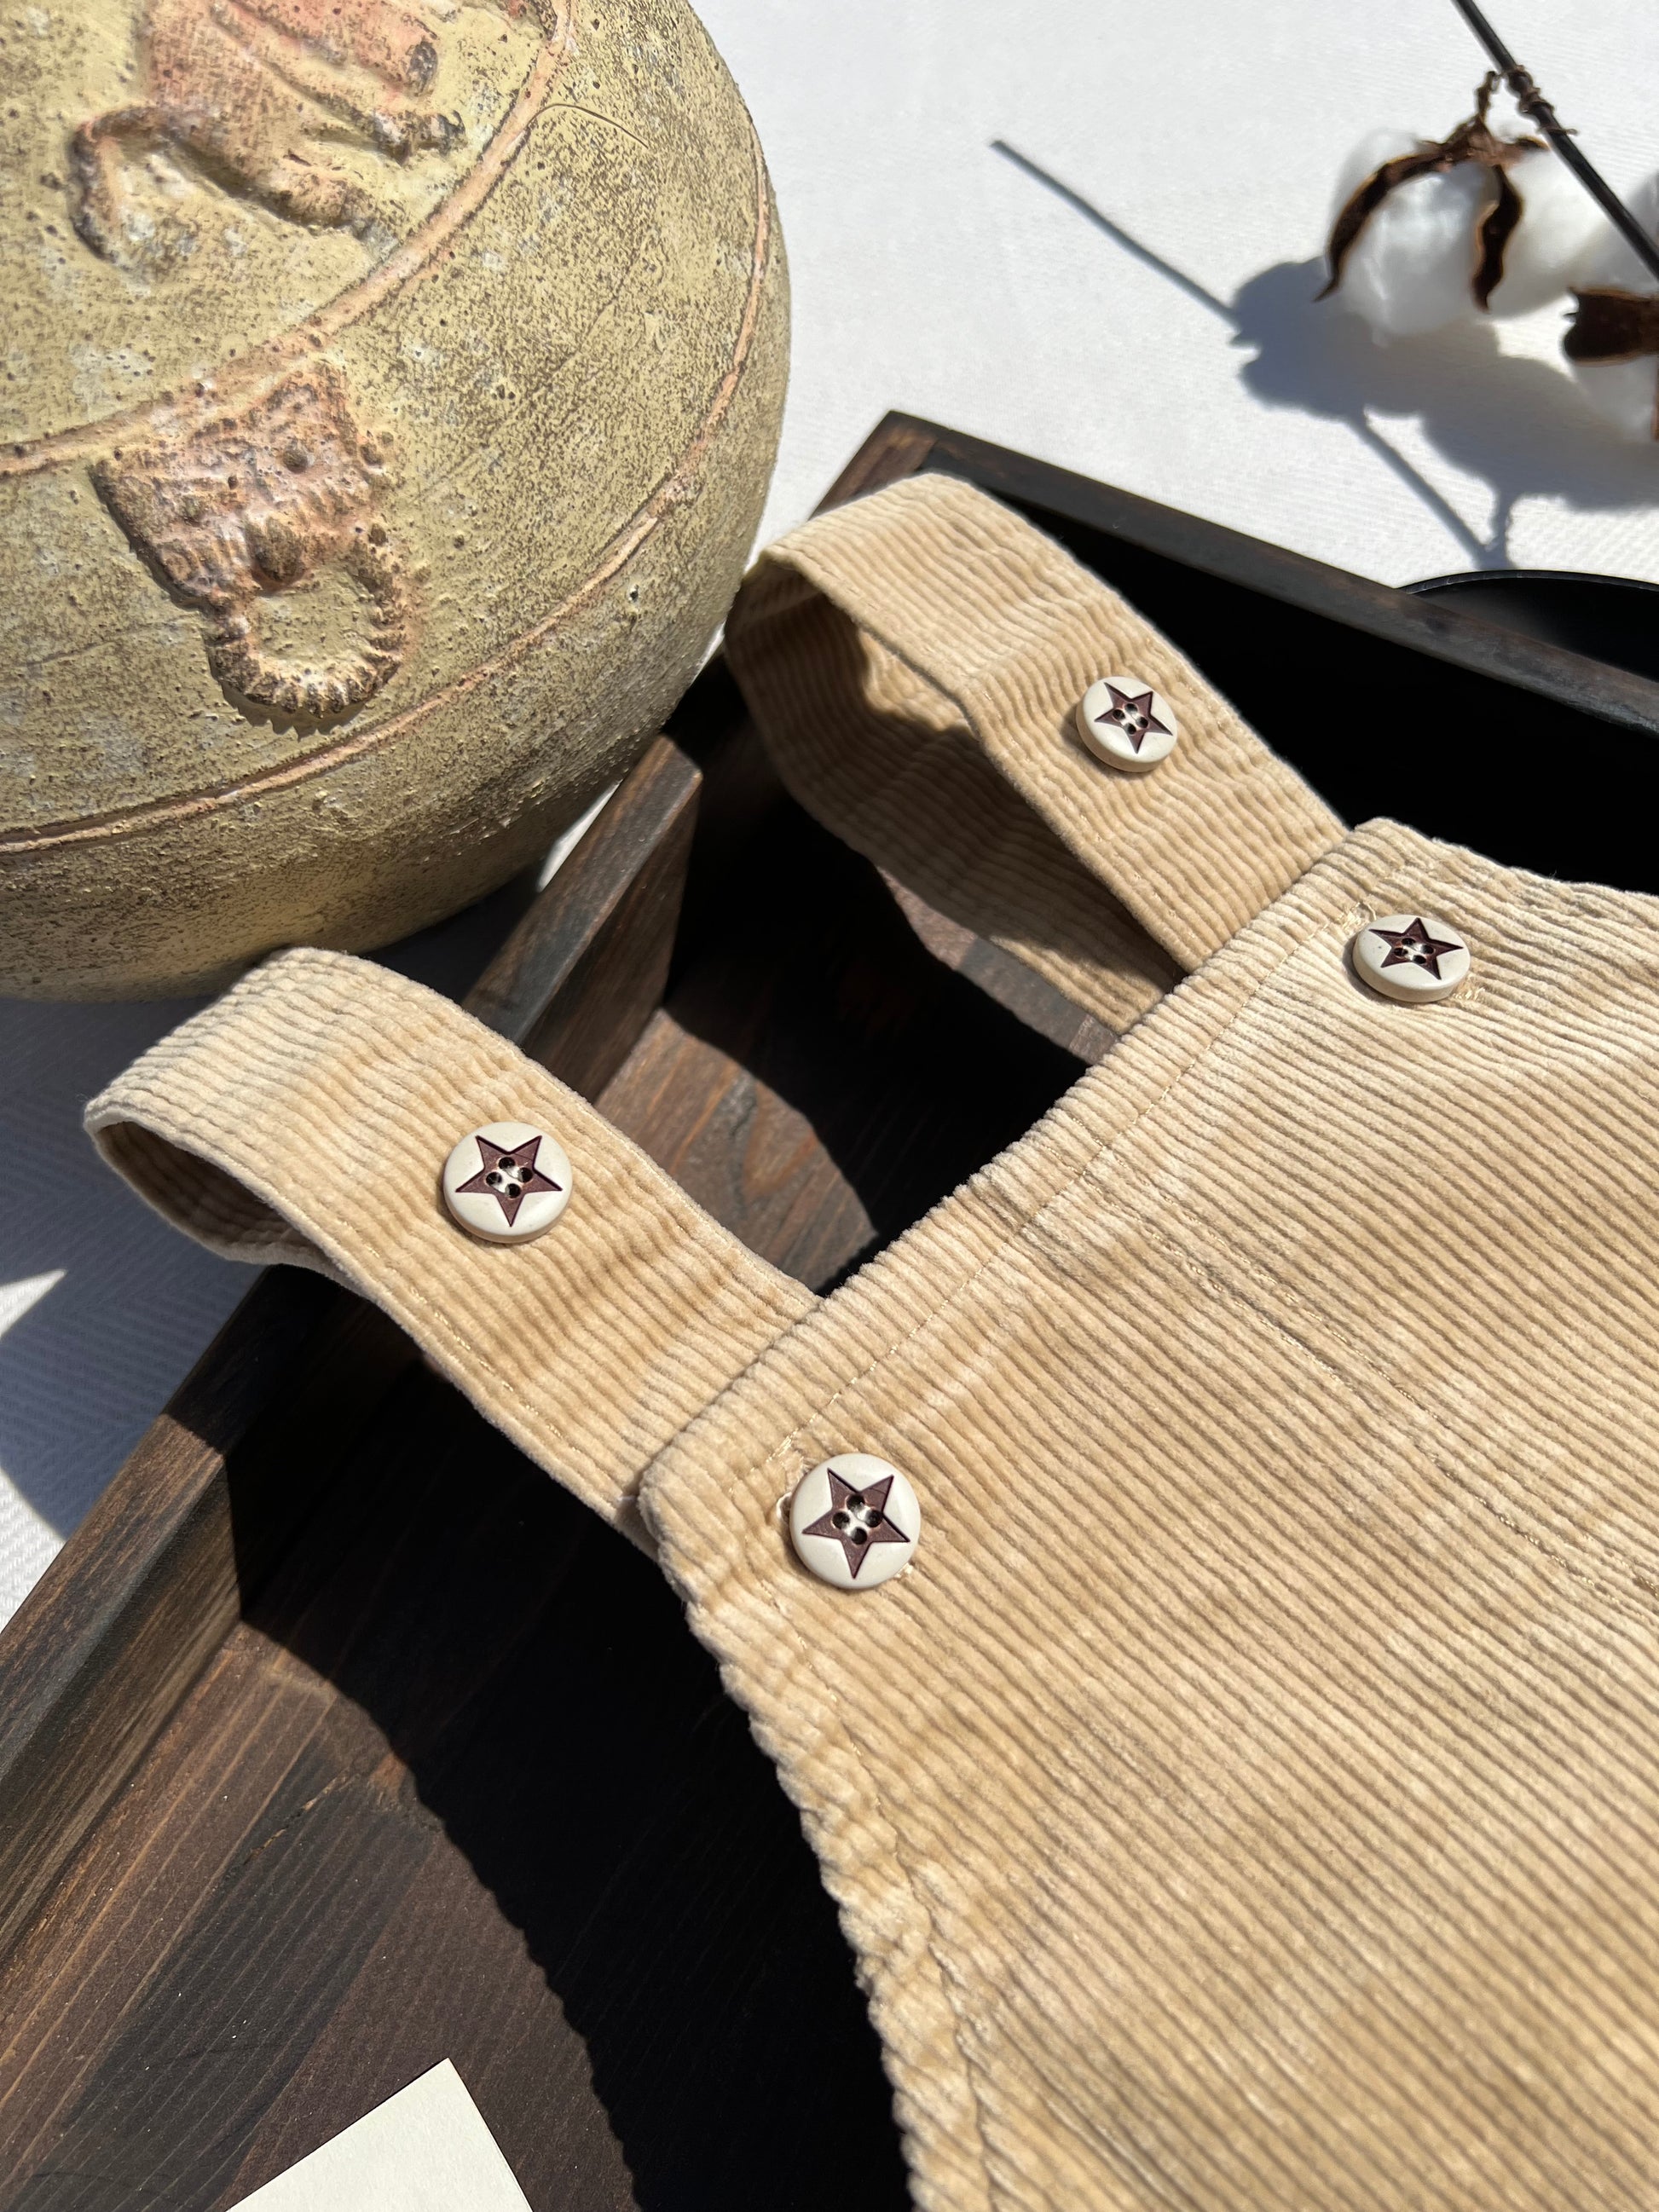 Beige Corduroy Baby Overalls with Adjustable Button-up Straps, Buttons are White with Brown Stars